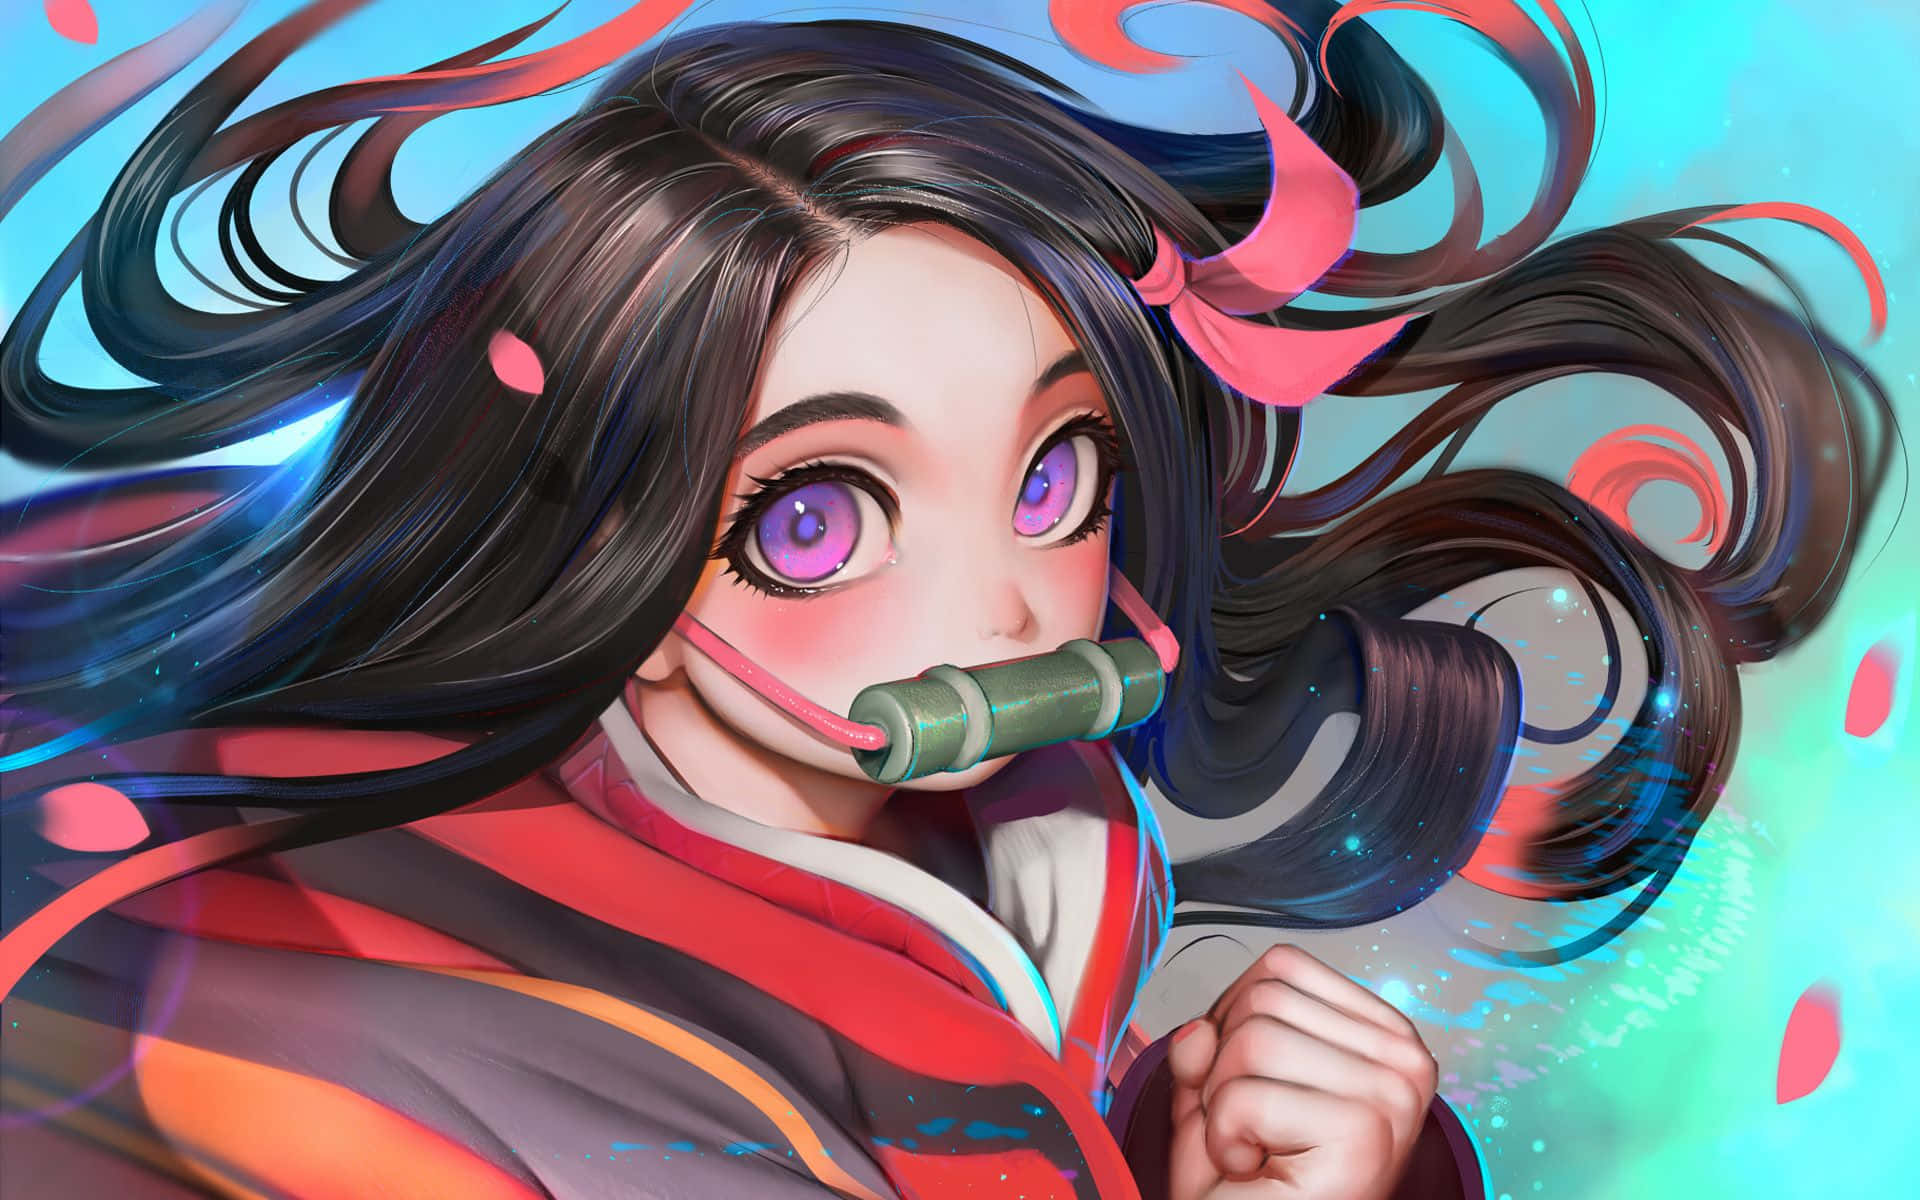 A look into the world of Nezuko, a determined young woman with a never-dying spirit.